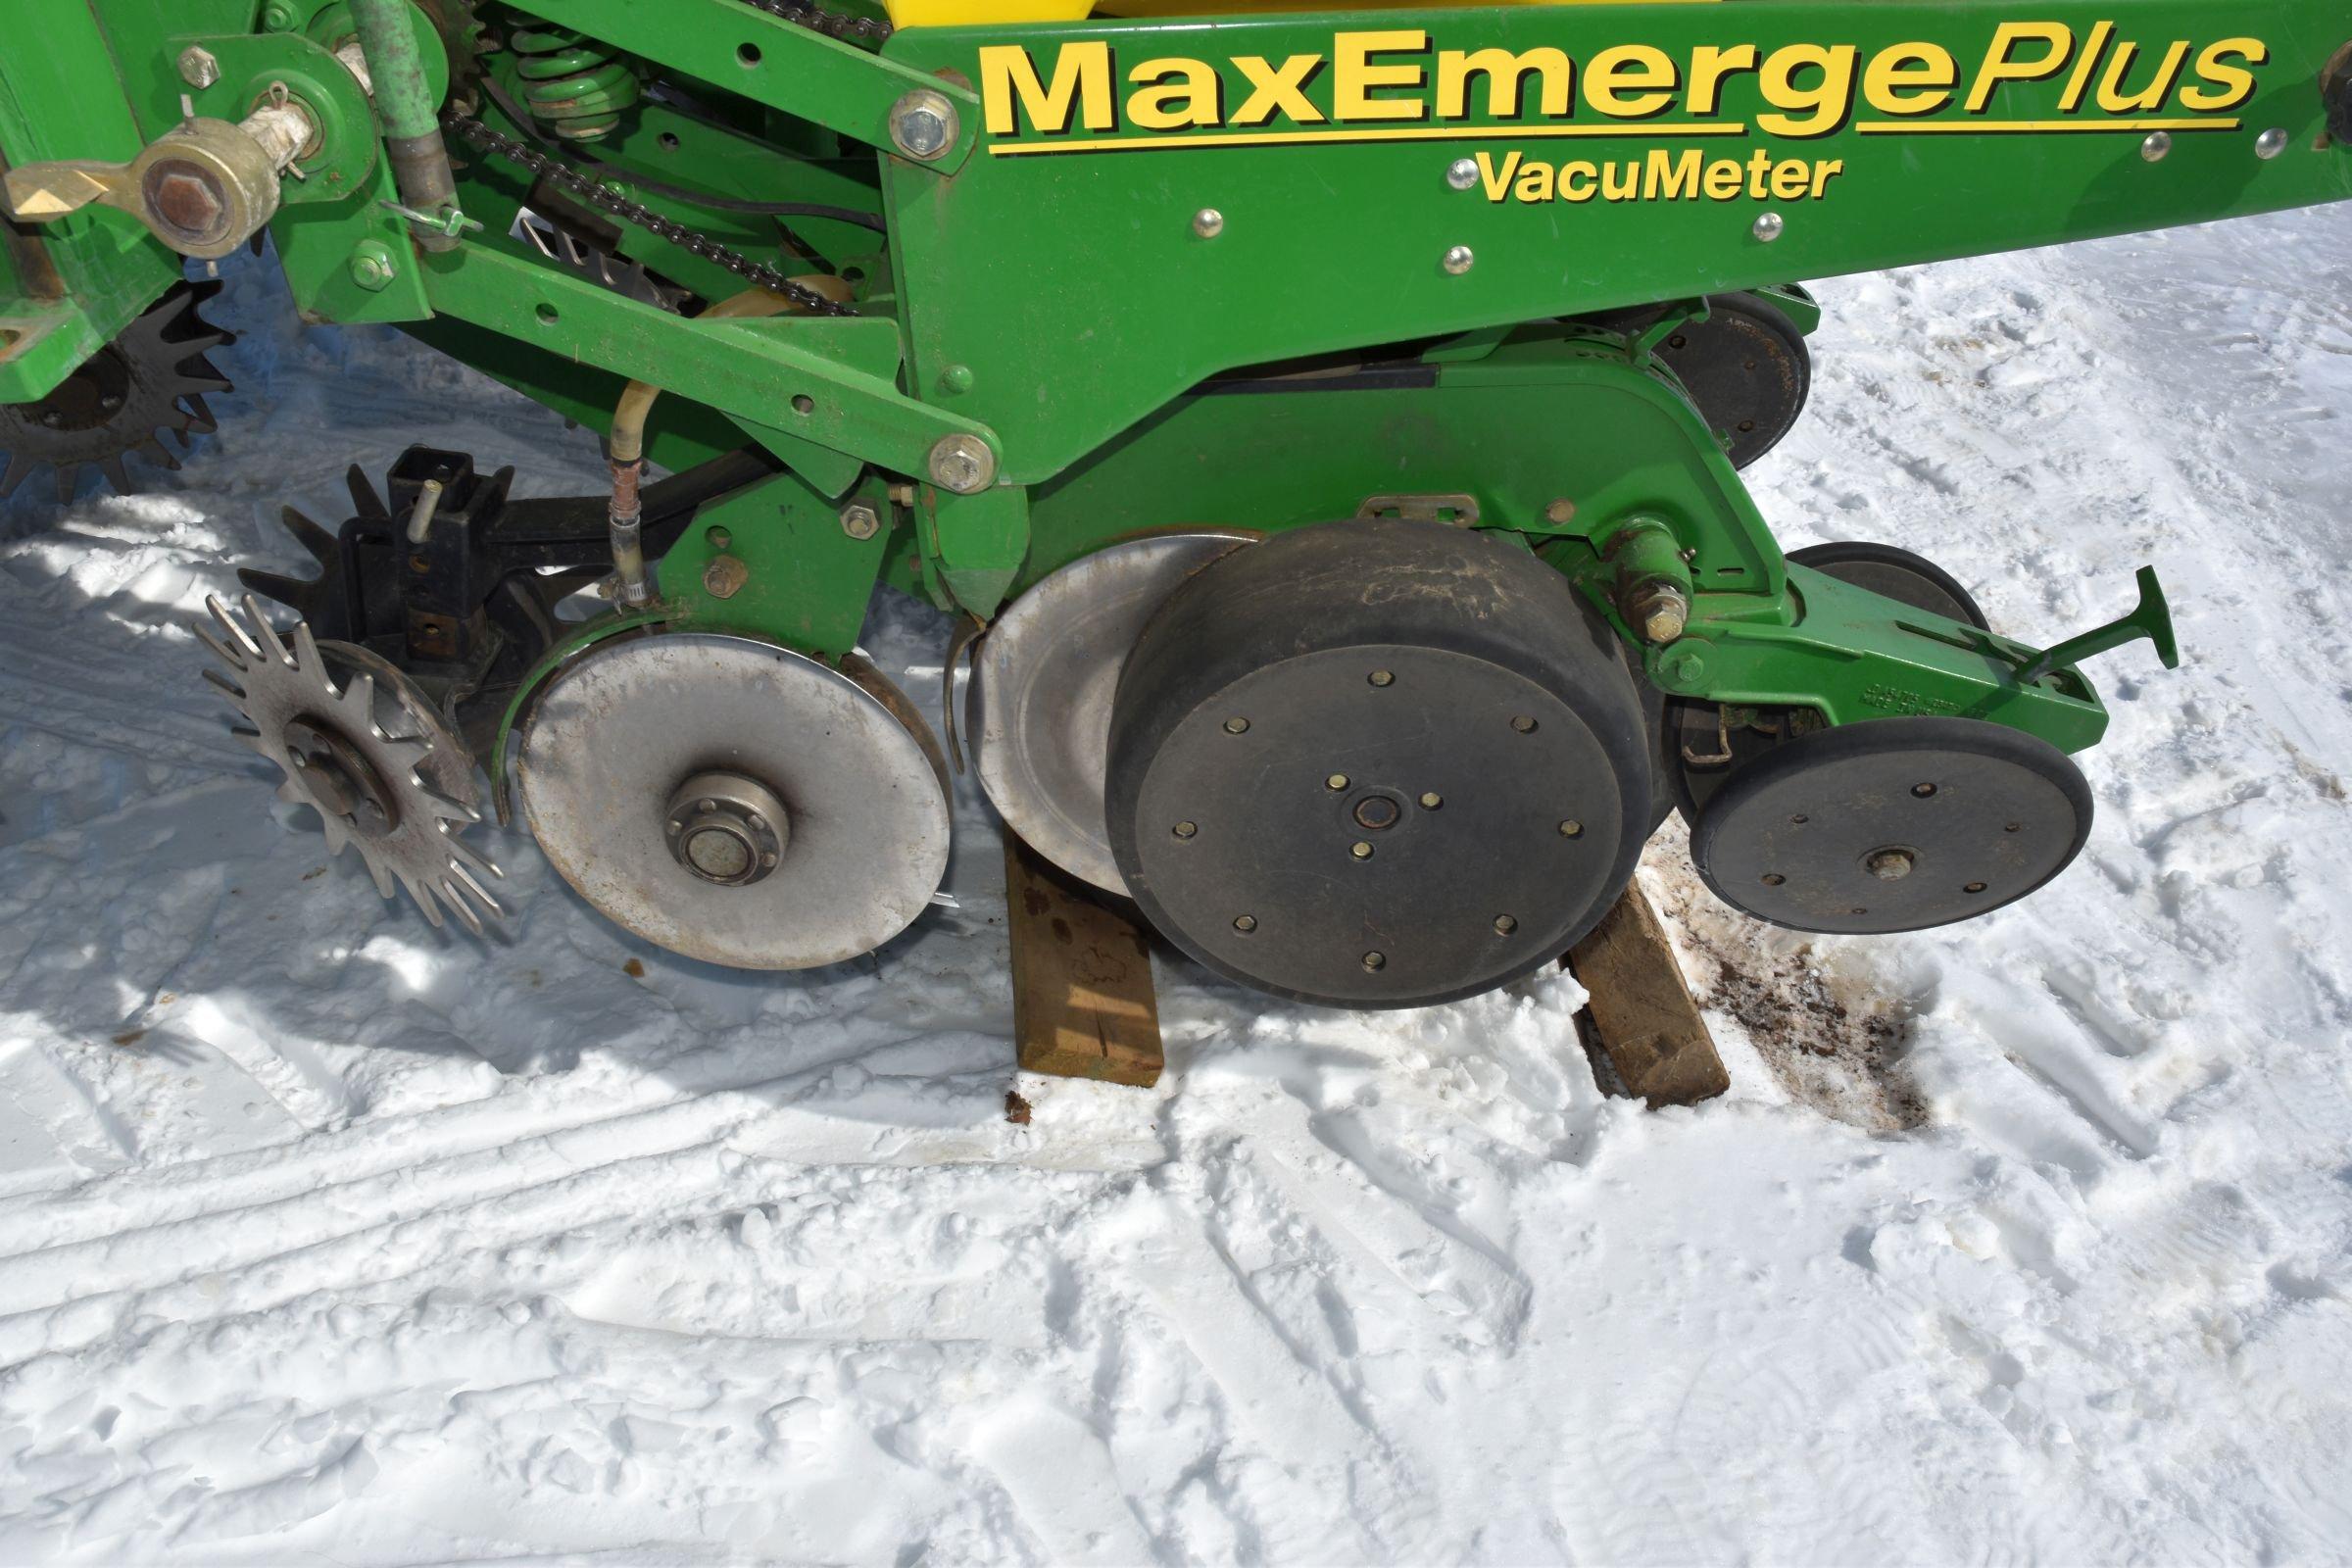 John Deere 1760 Conservation Maxemerge Planter, 12 Row 30”, Liquid Fertilizer, Row Cleaners, Insect